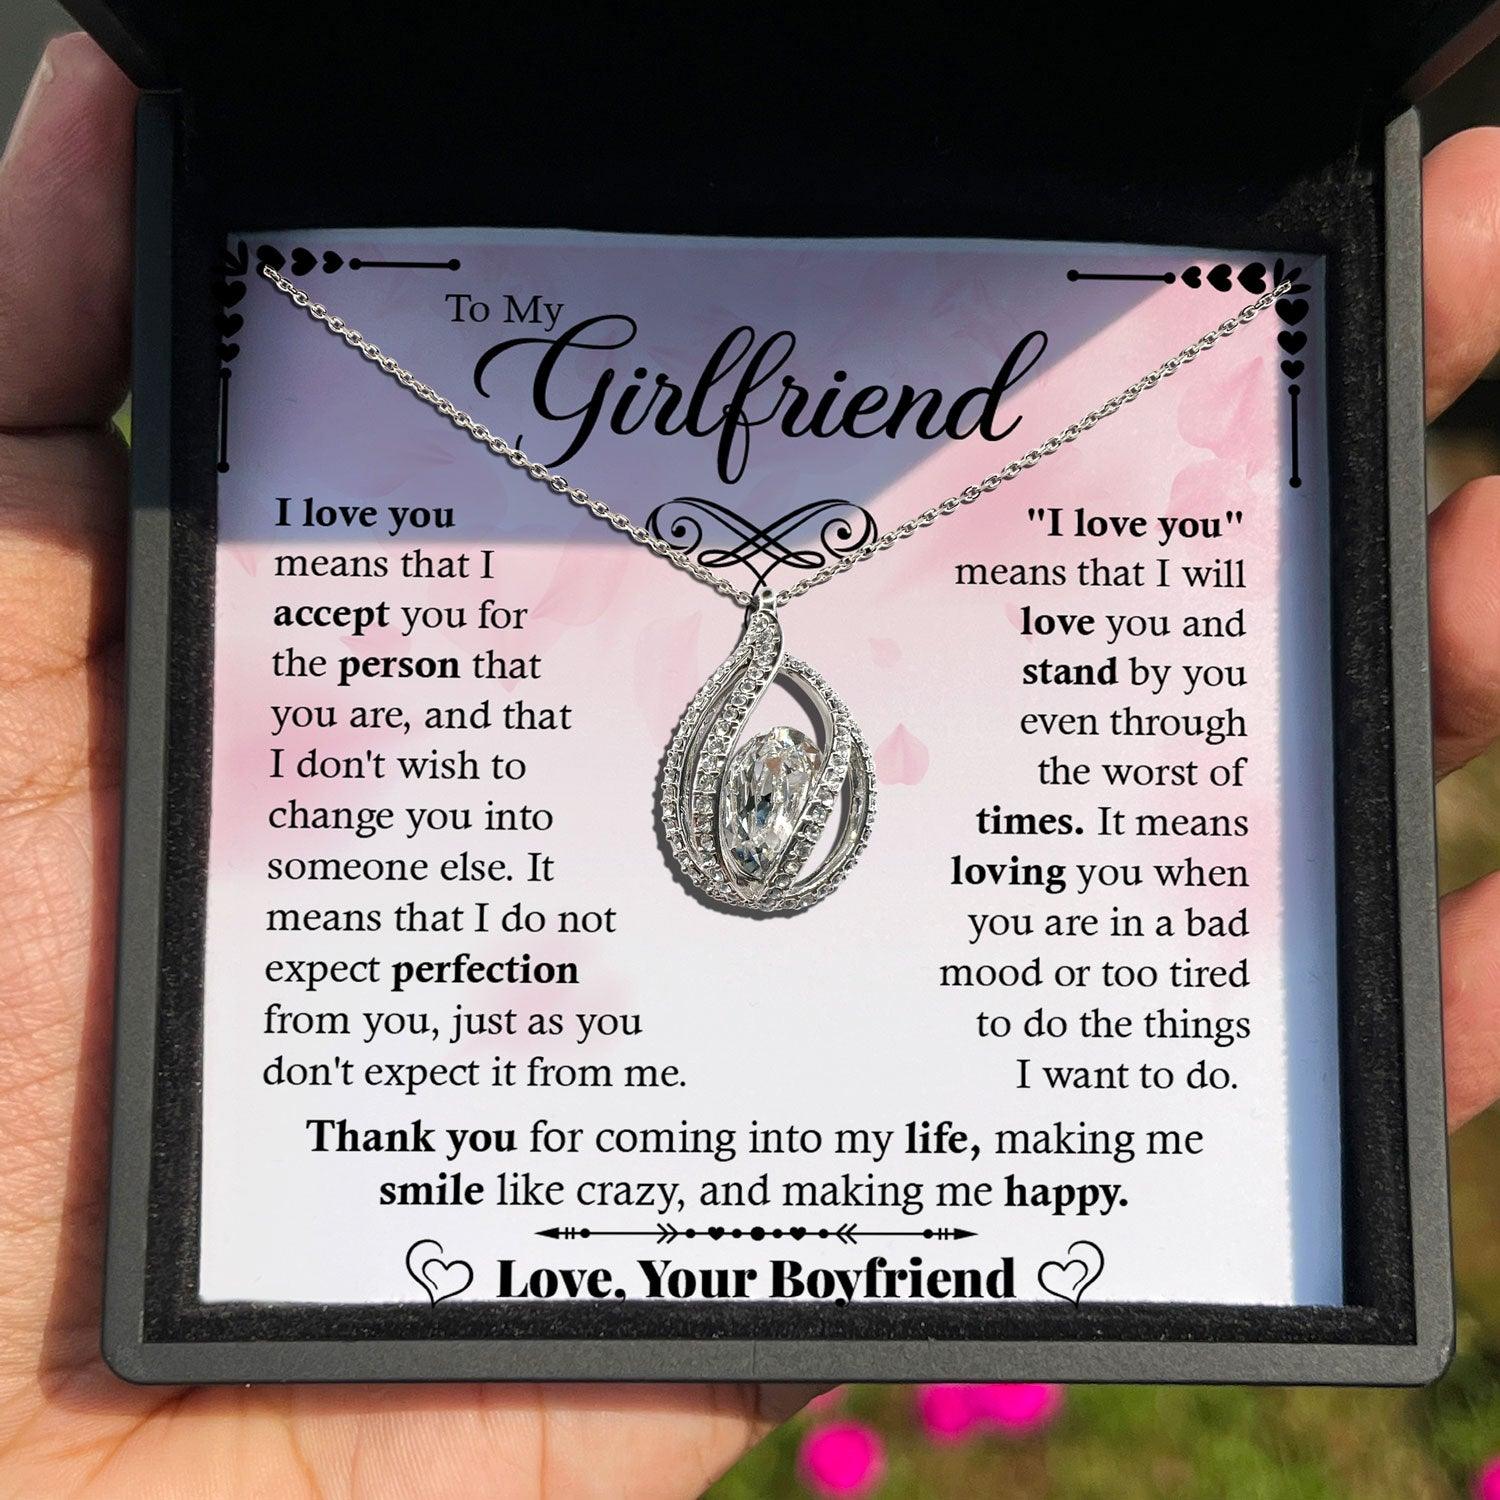 To My Girlfriend - I Love You Means That I Accept You For The Person That You Are - Orbital Birdcage Necklace - TRYNDI